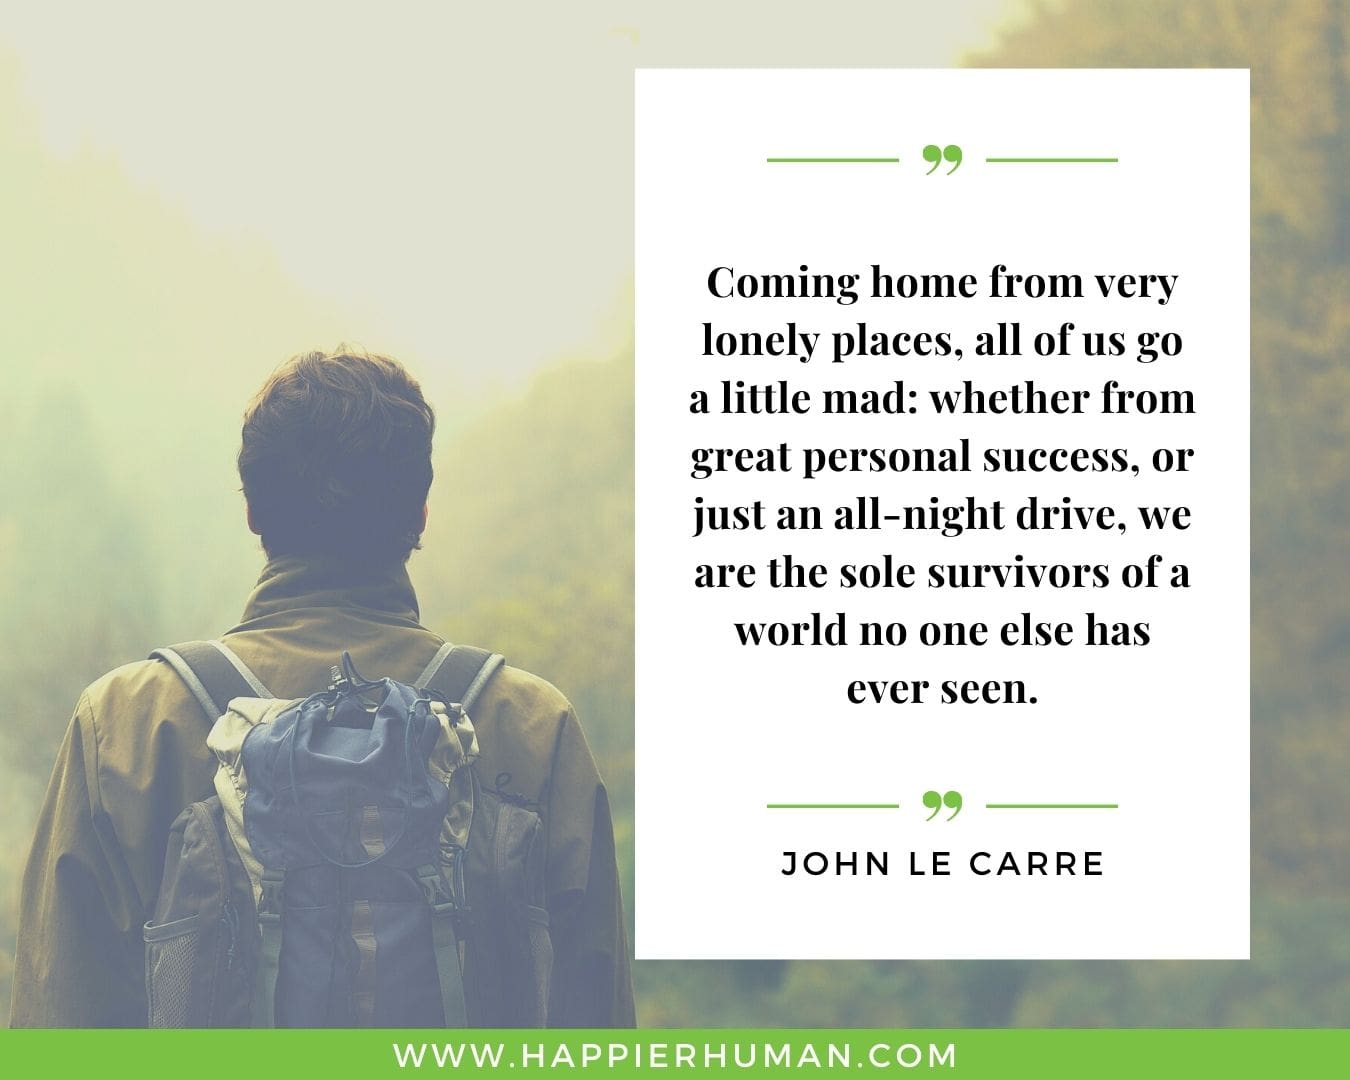 Loneliness Quotes - “Coming home from very lonely places, all of us go a little mad: whether from great personal success, or just an all-night drive, we are the sole survivors of a world no one else has ever seen.”– John Le Carre